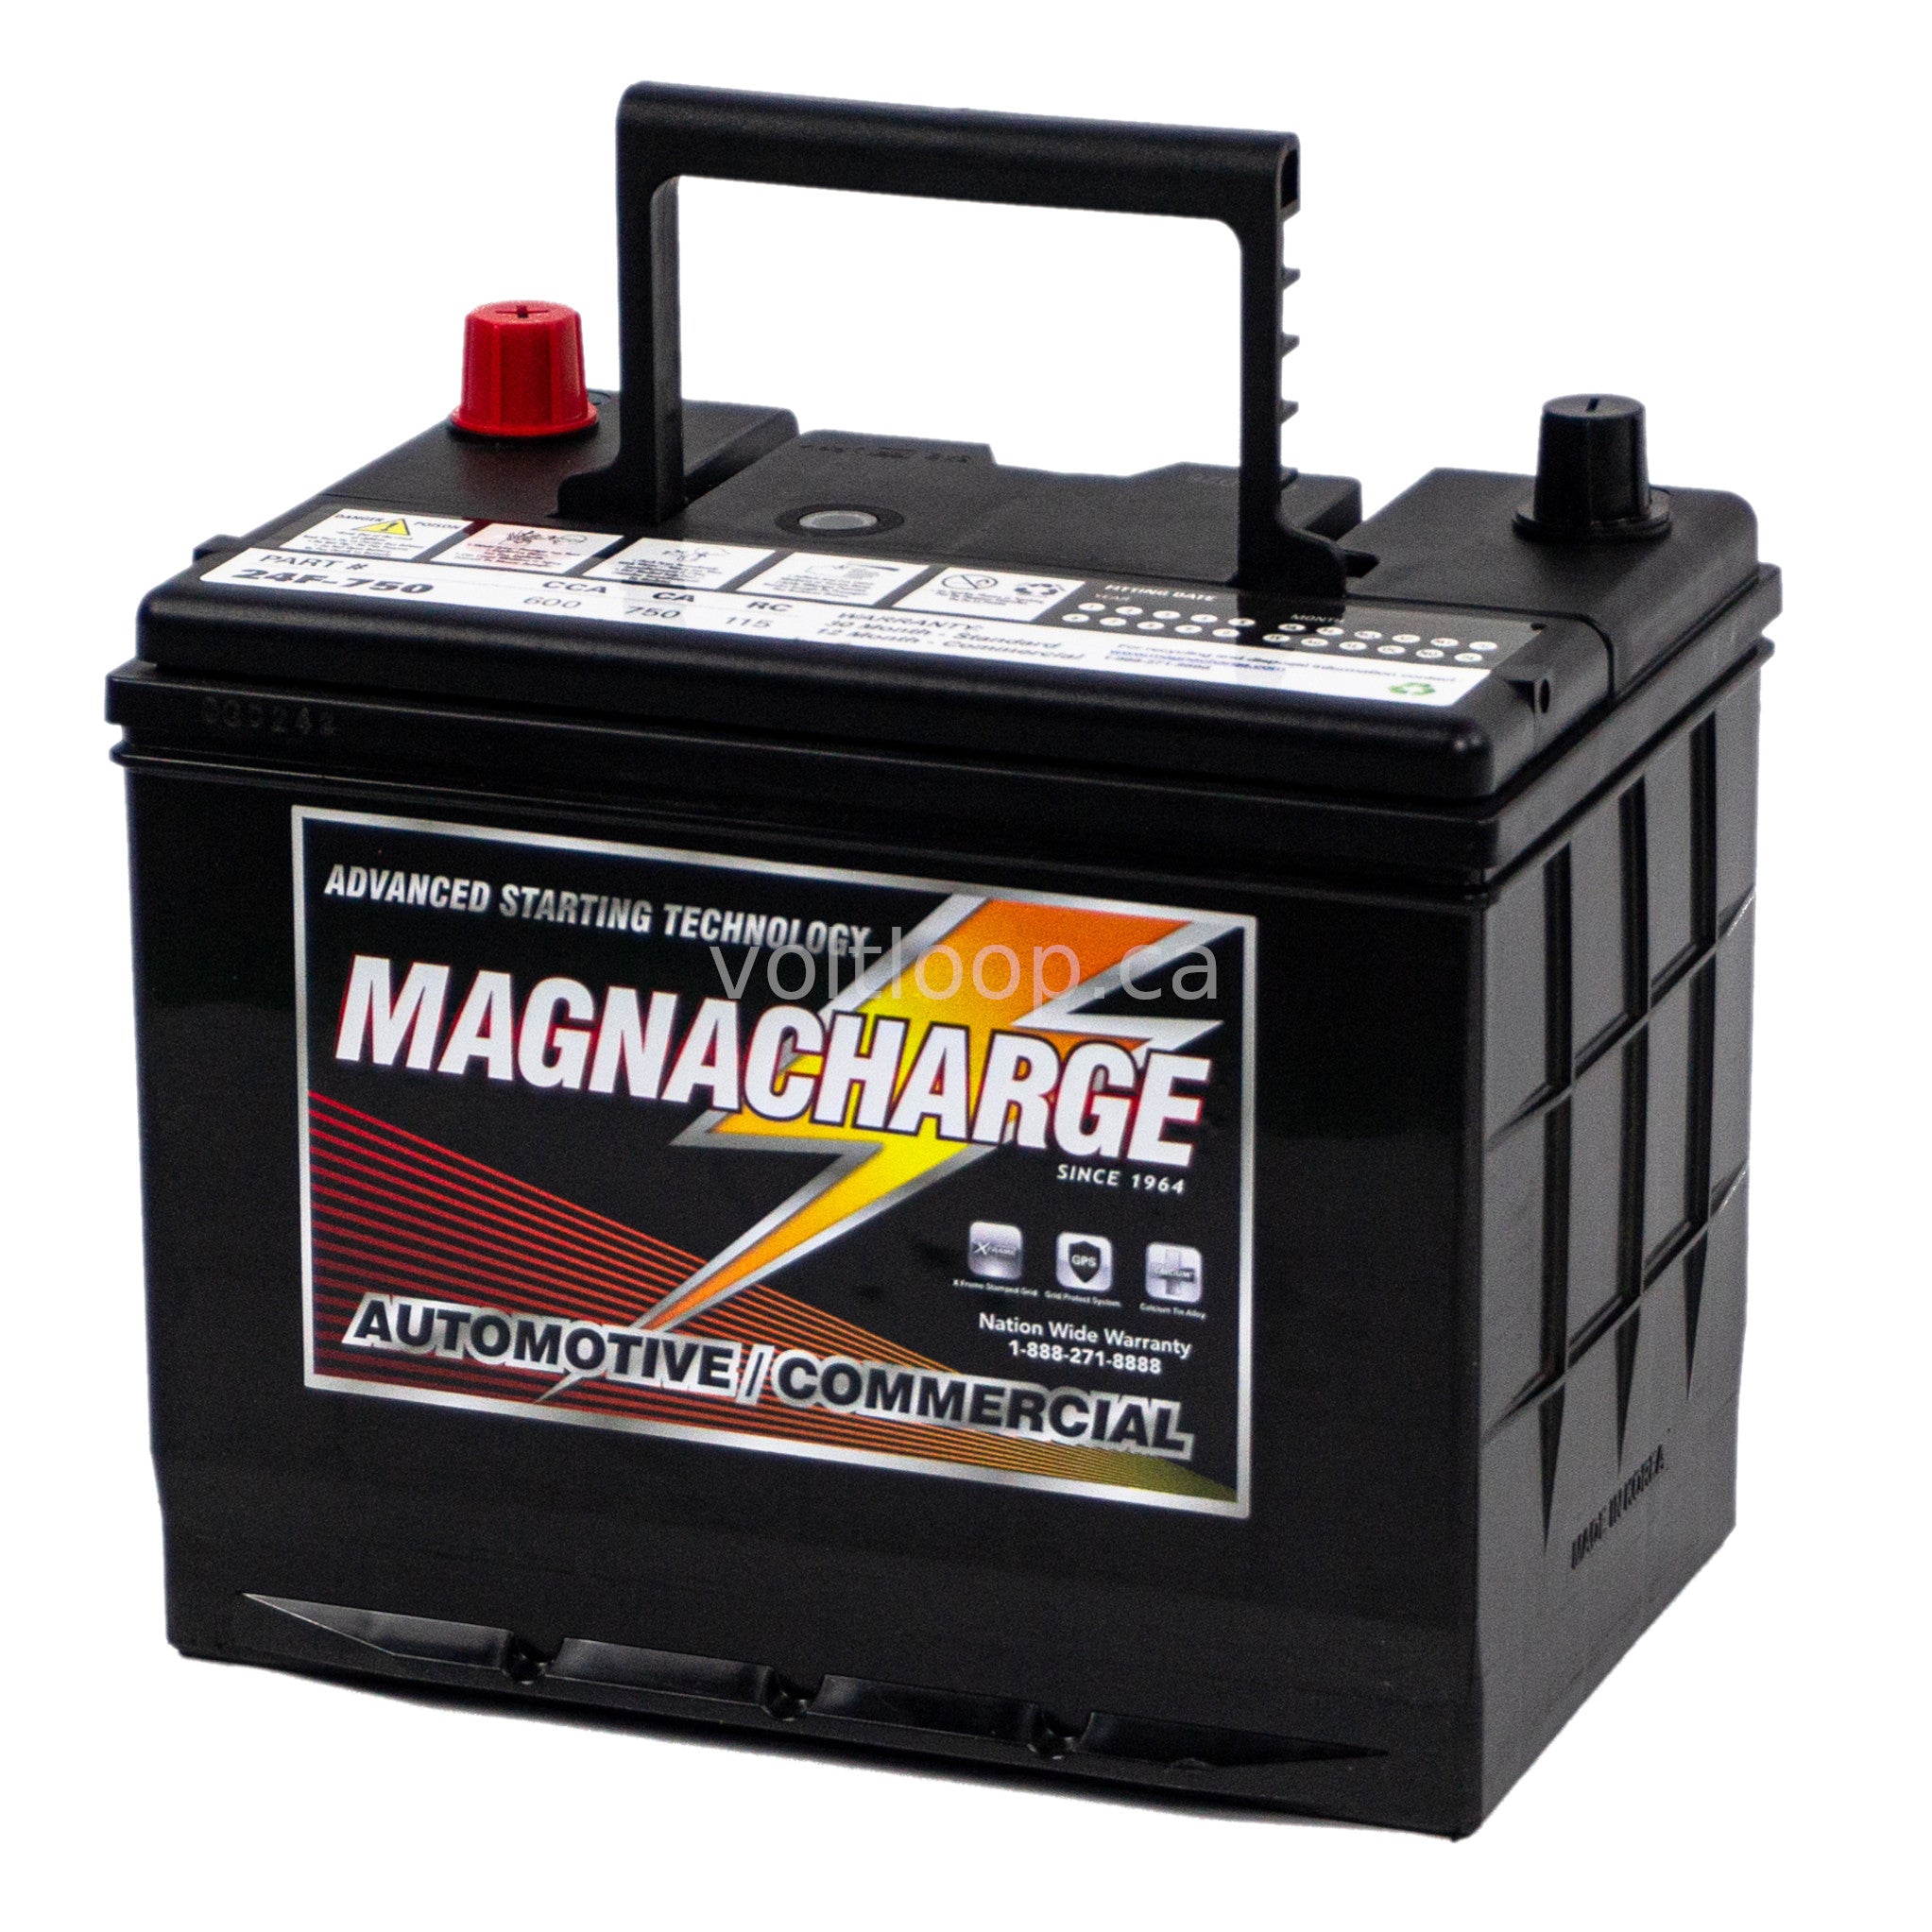 Magnacharge 24F-750 Group 24F Car Battery